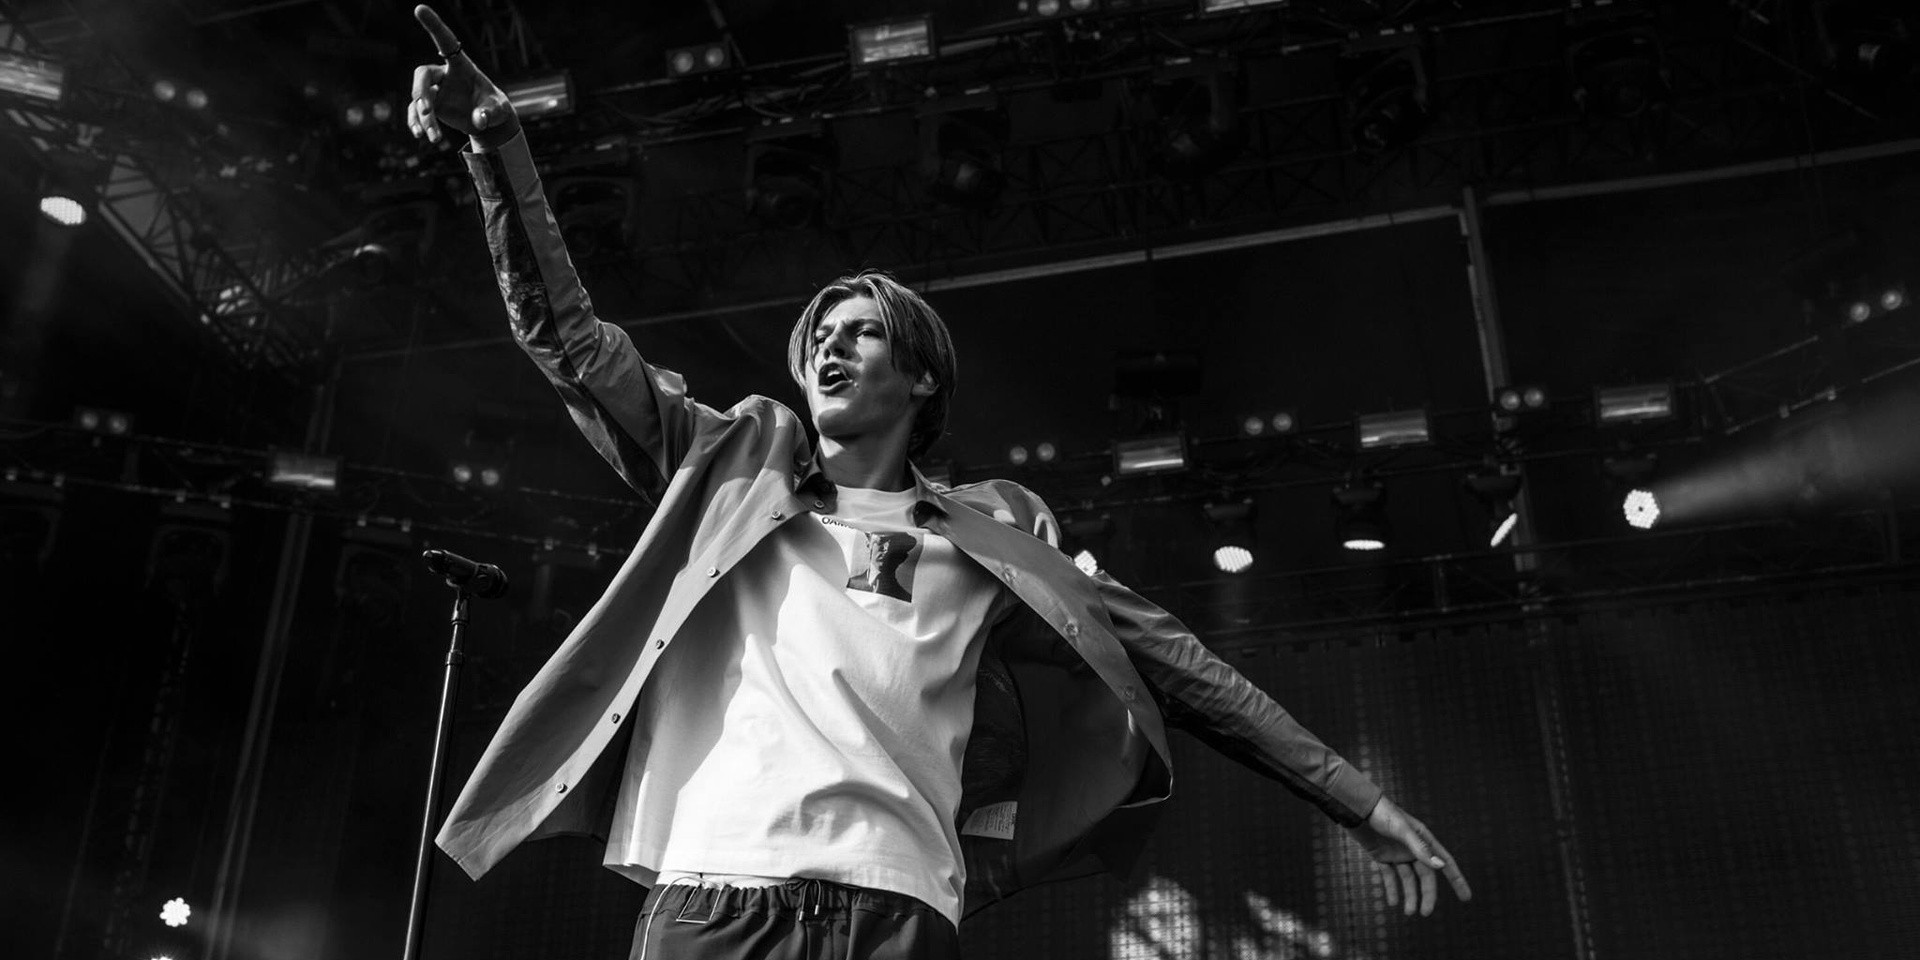 Ruel to perform in Manila